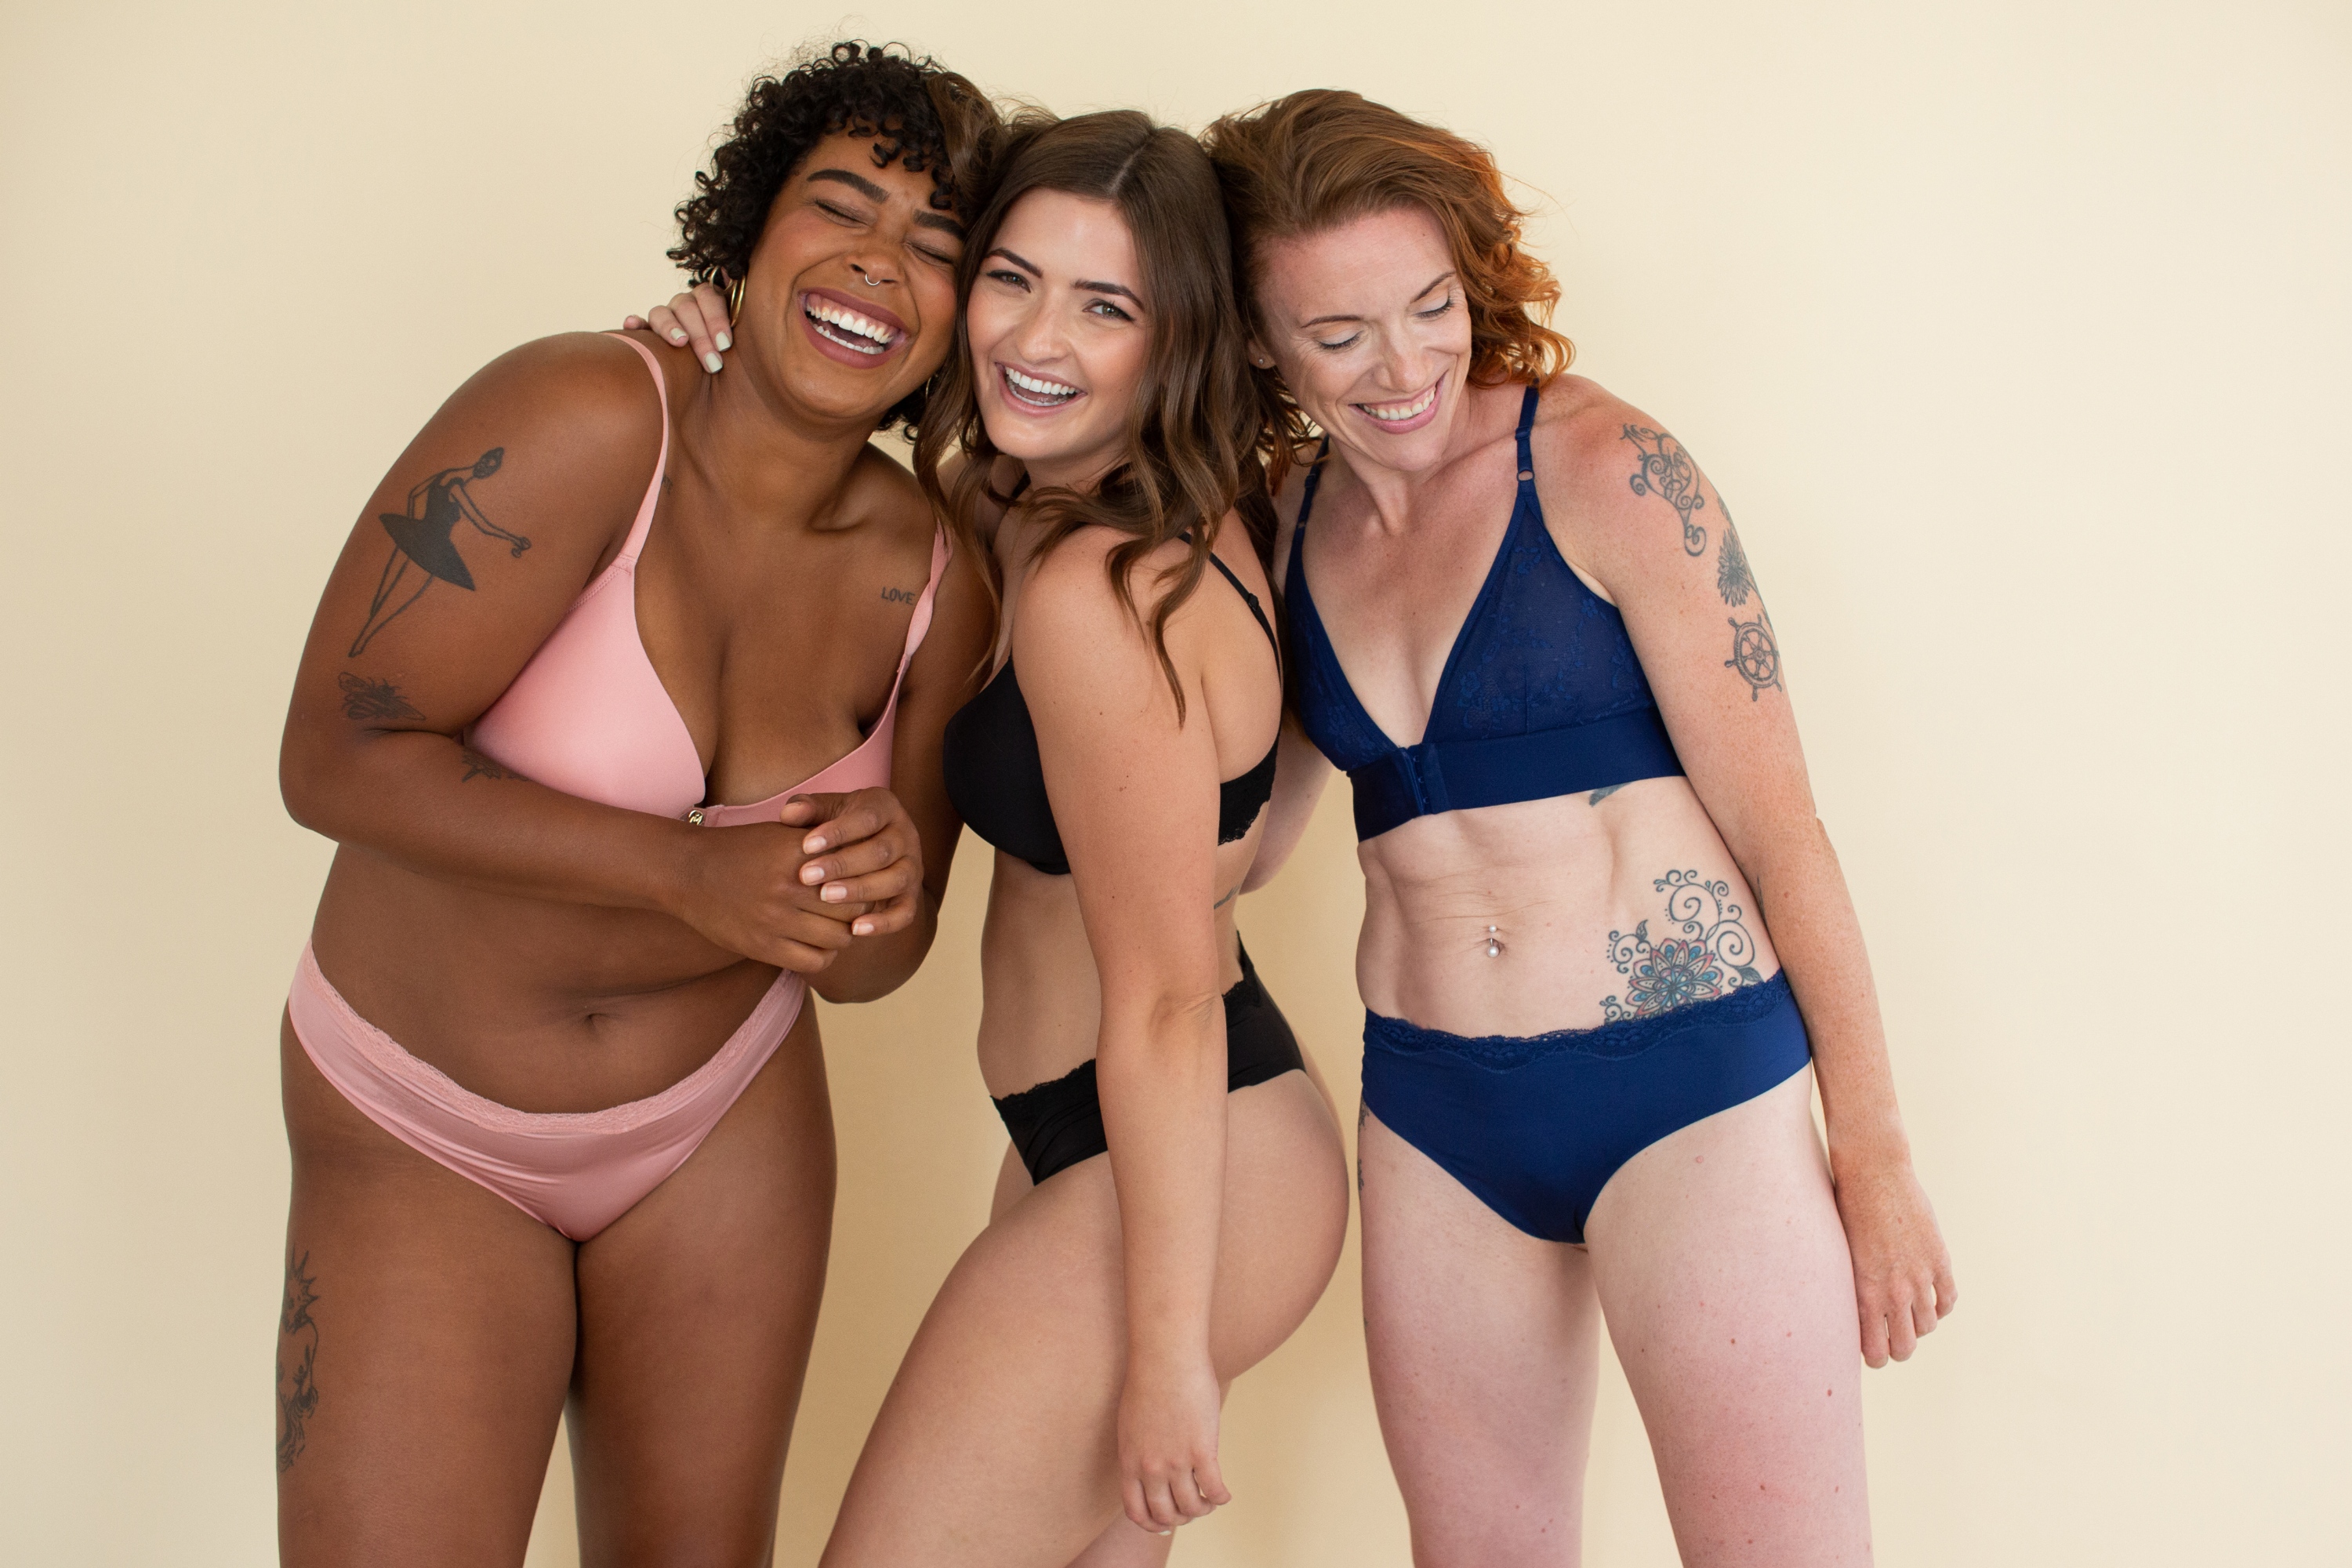 This Canadian lingerie company is giving away FREE panties